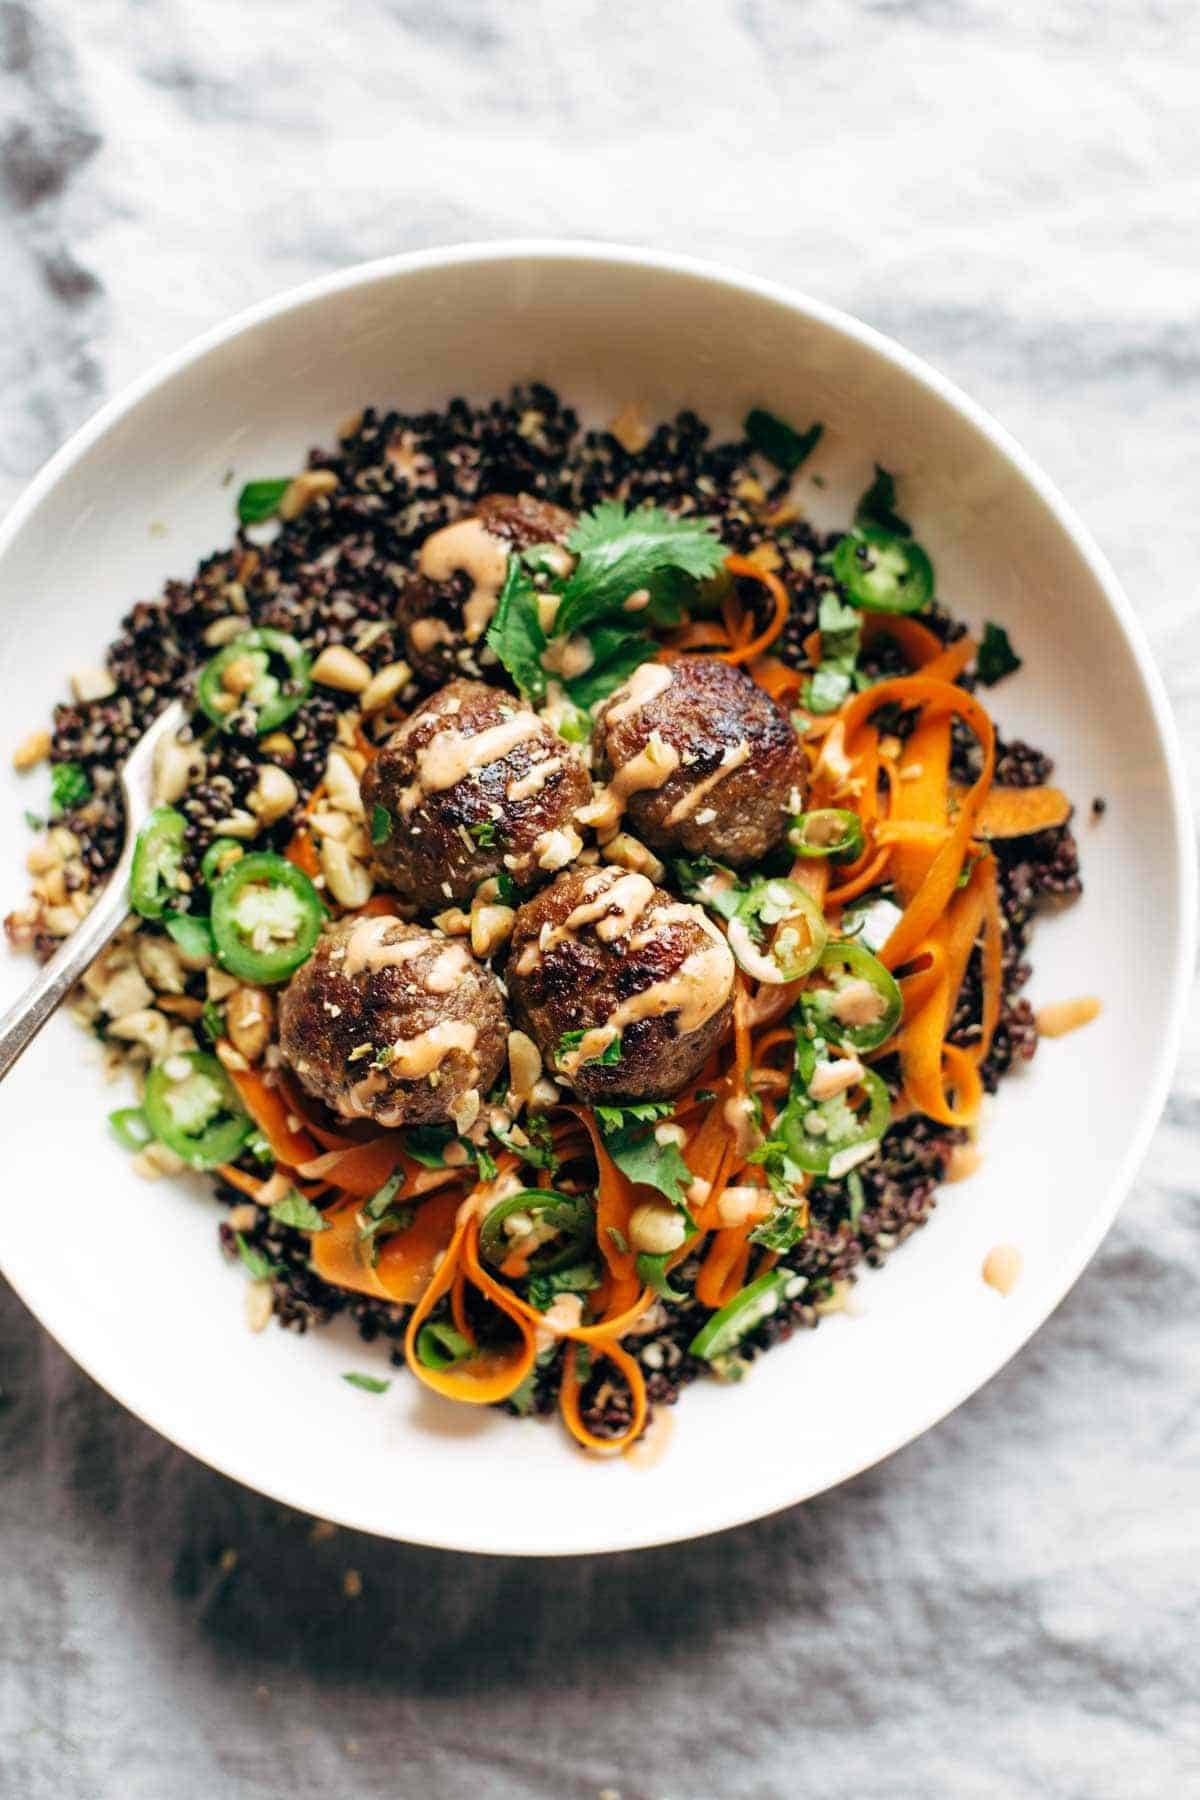 Banh Mi Bowls! A quick and easy meal featuring quinoa or rice topped with quick pickled carrots, herbs, peanuts, and easy lemongrass pork meatballs, all covered with spicy mayo. | pinchofyum.com